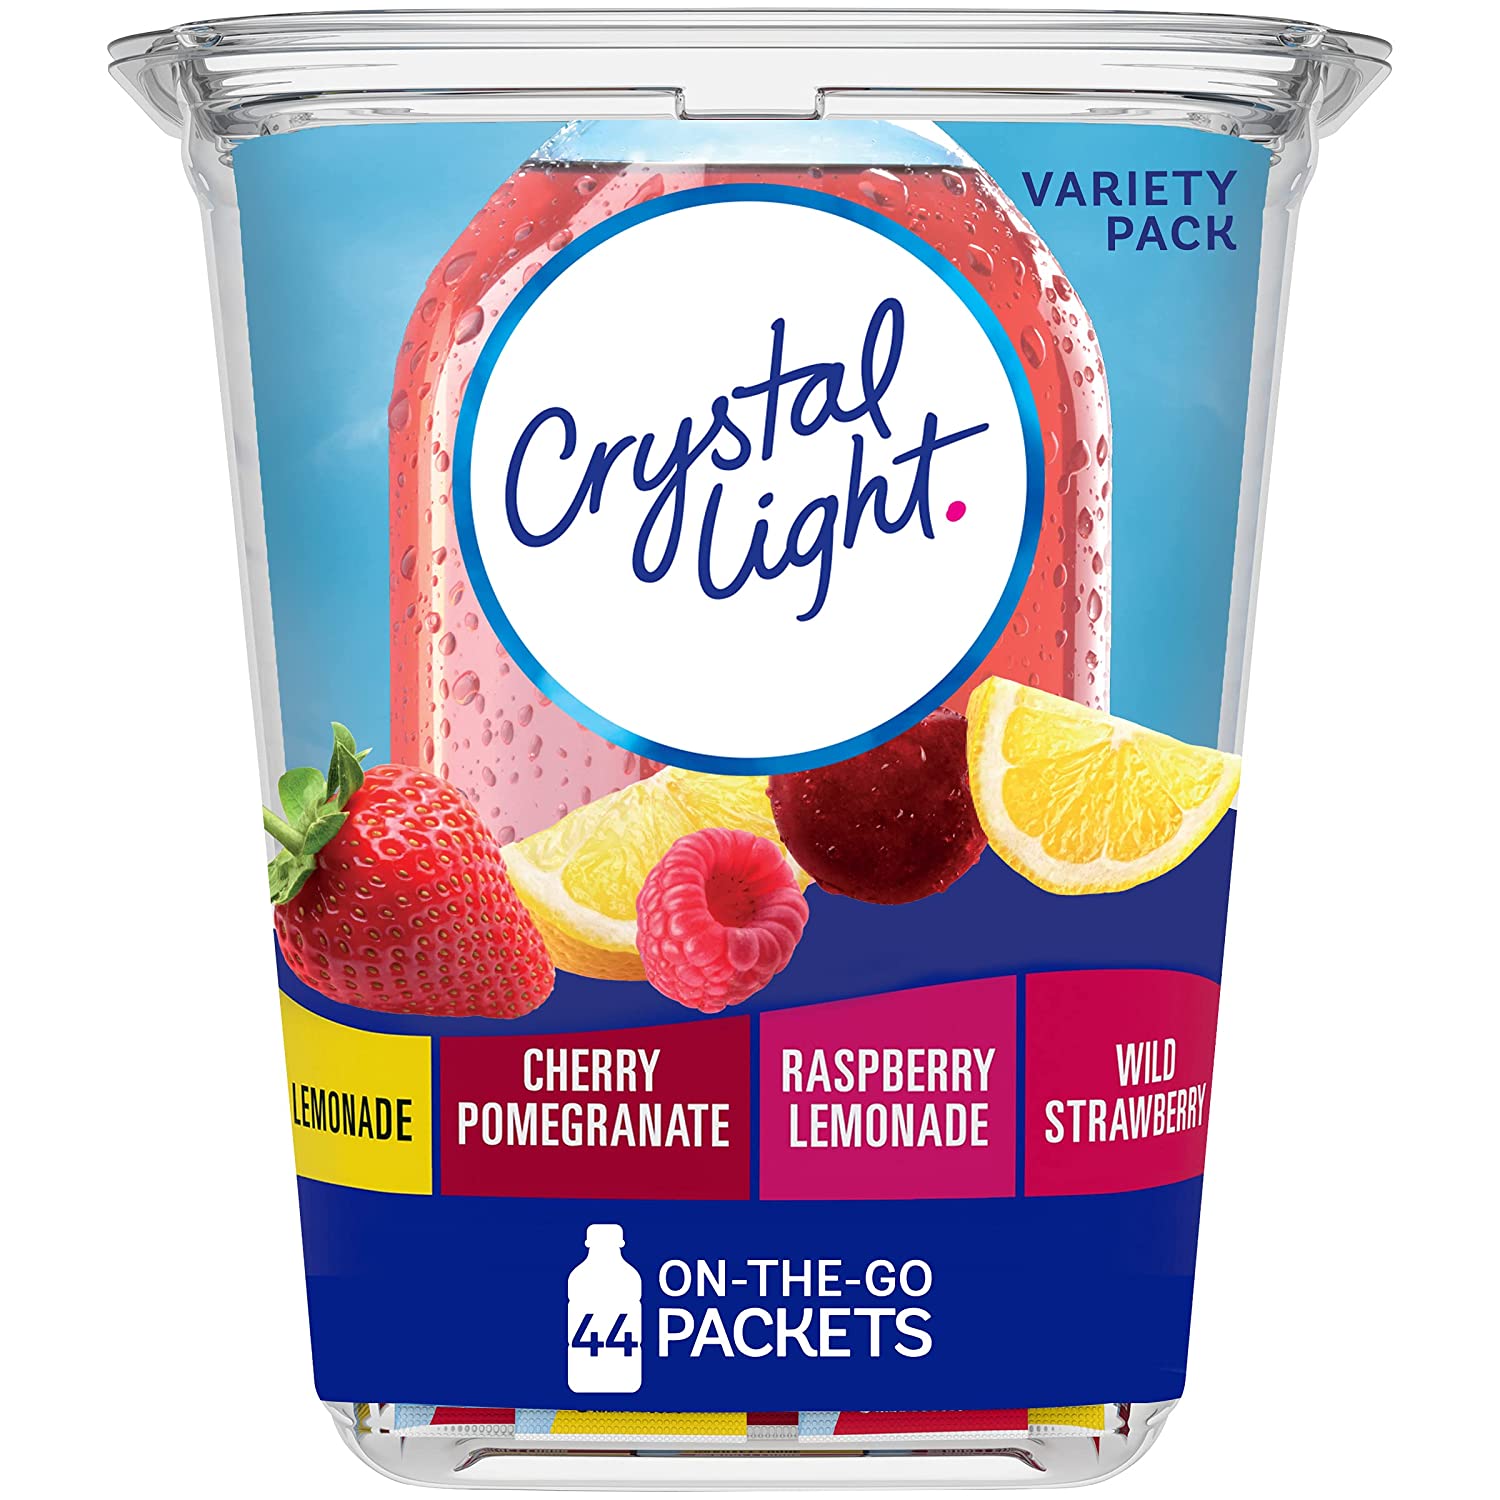 Crystal Light Multi-Flavor Drink Mix/Water Enhancement, 44-Count